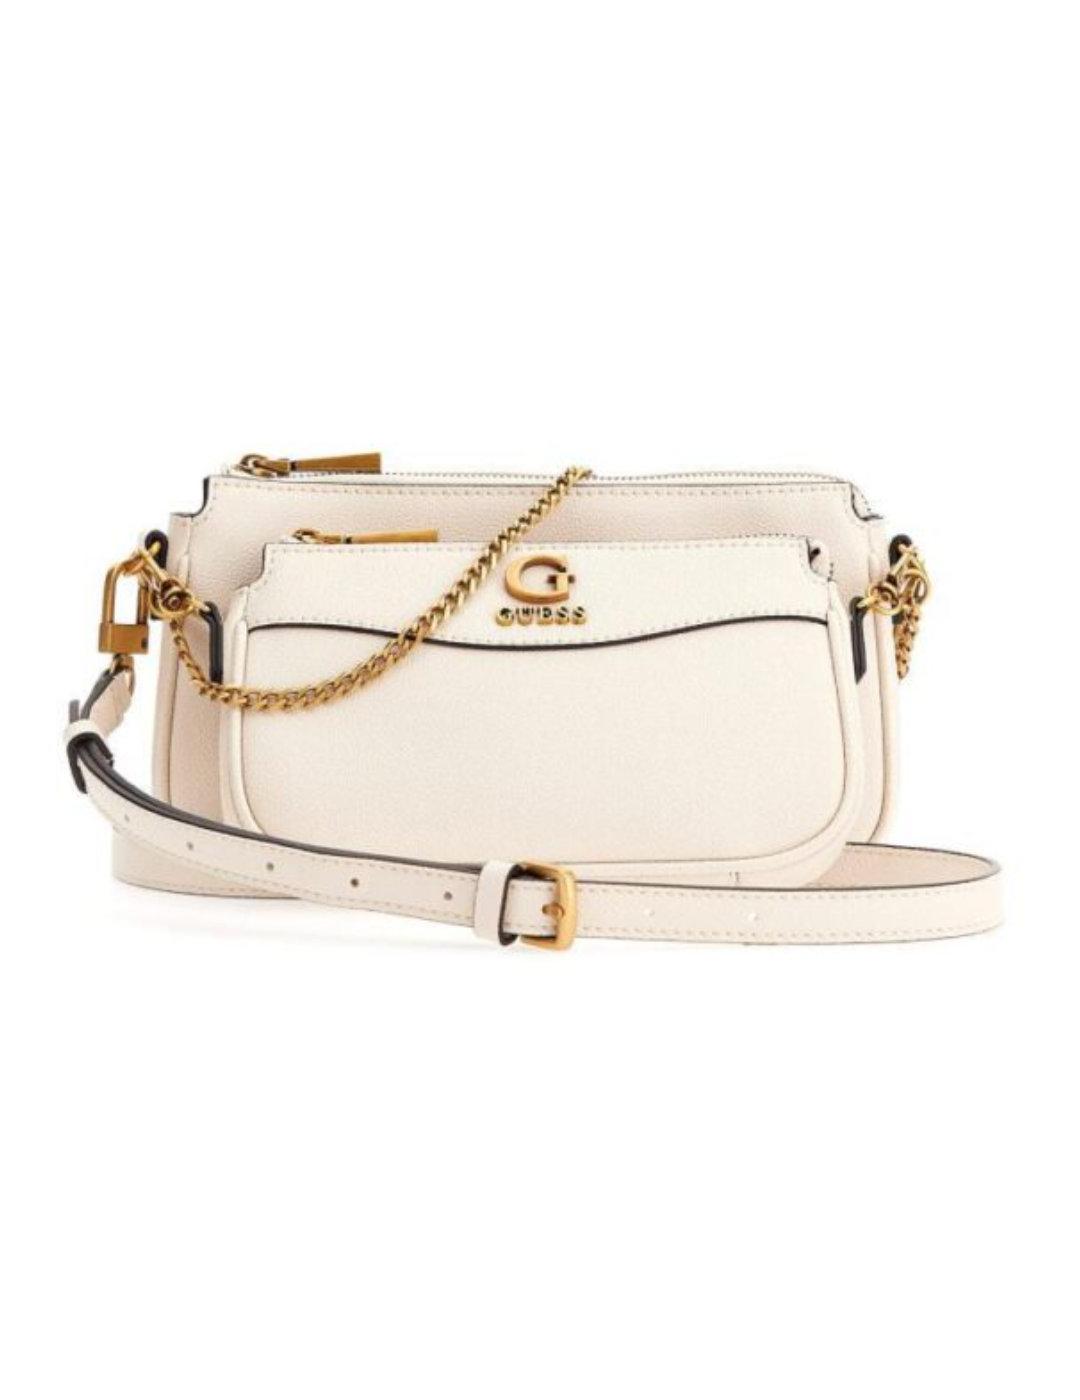 BOLSO MUJER GUESS JEANS BEIGE